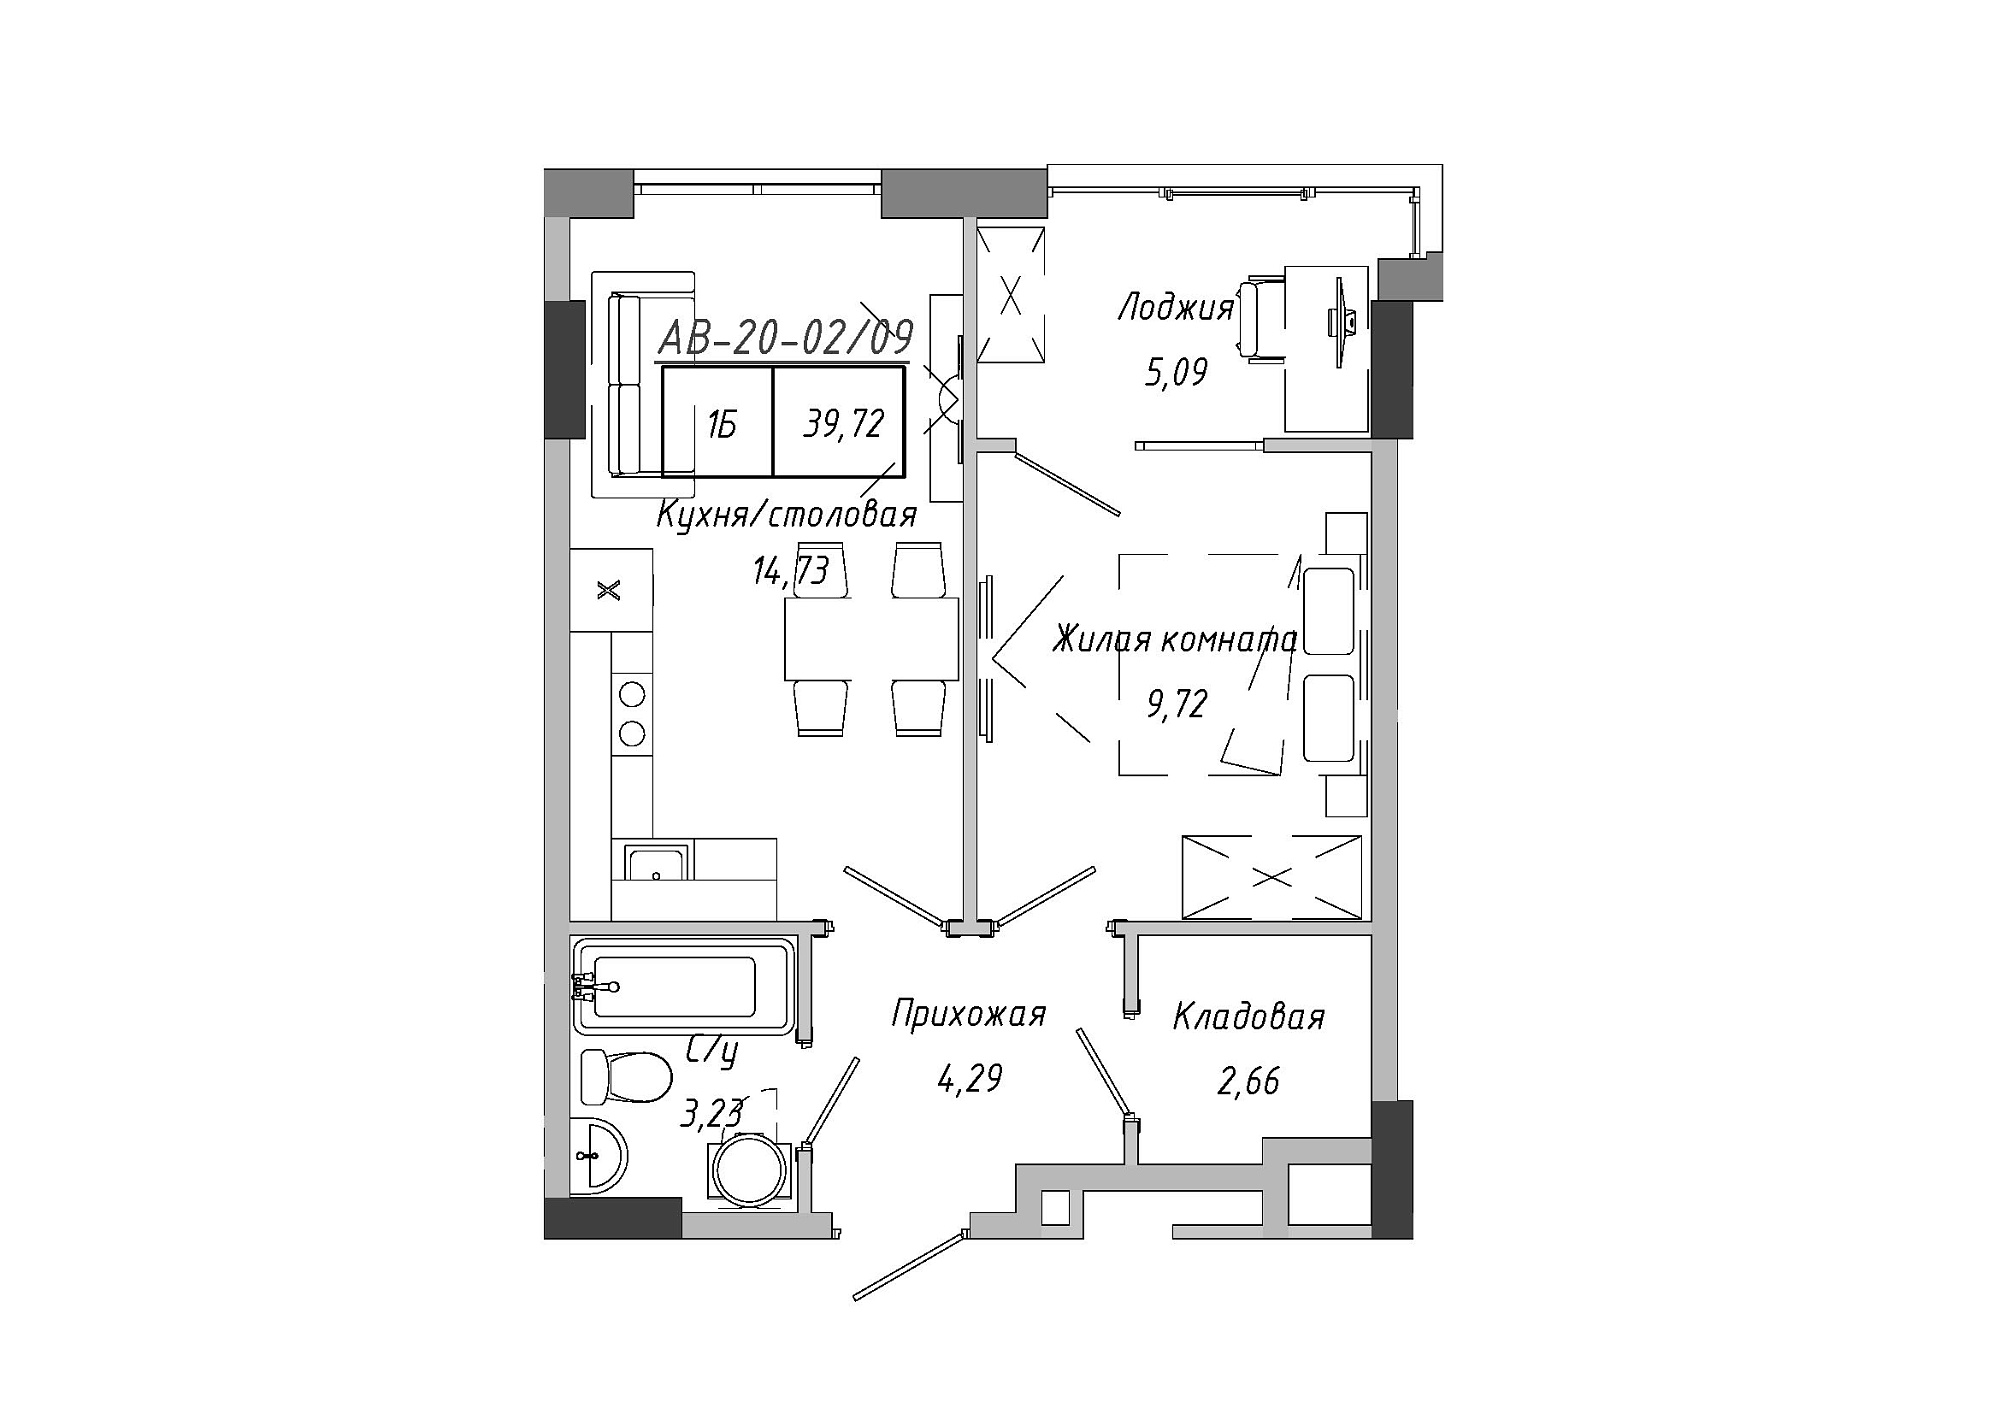 Planning 1-rm flats area 37.59m2, AB-20-02/00009.